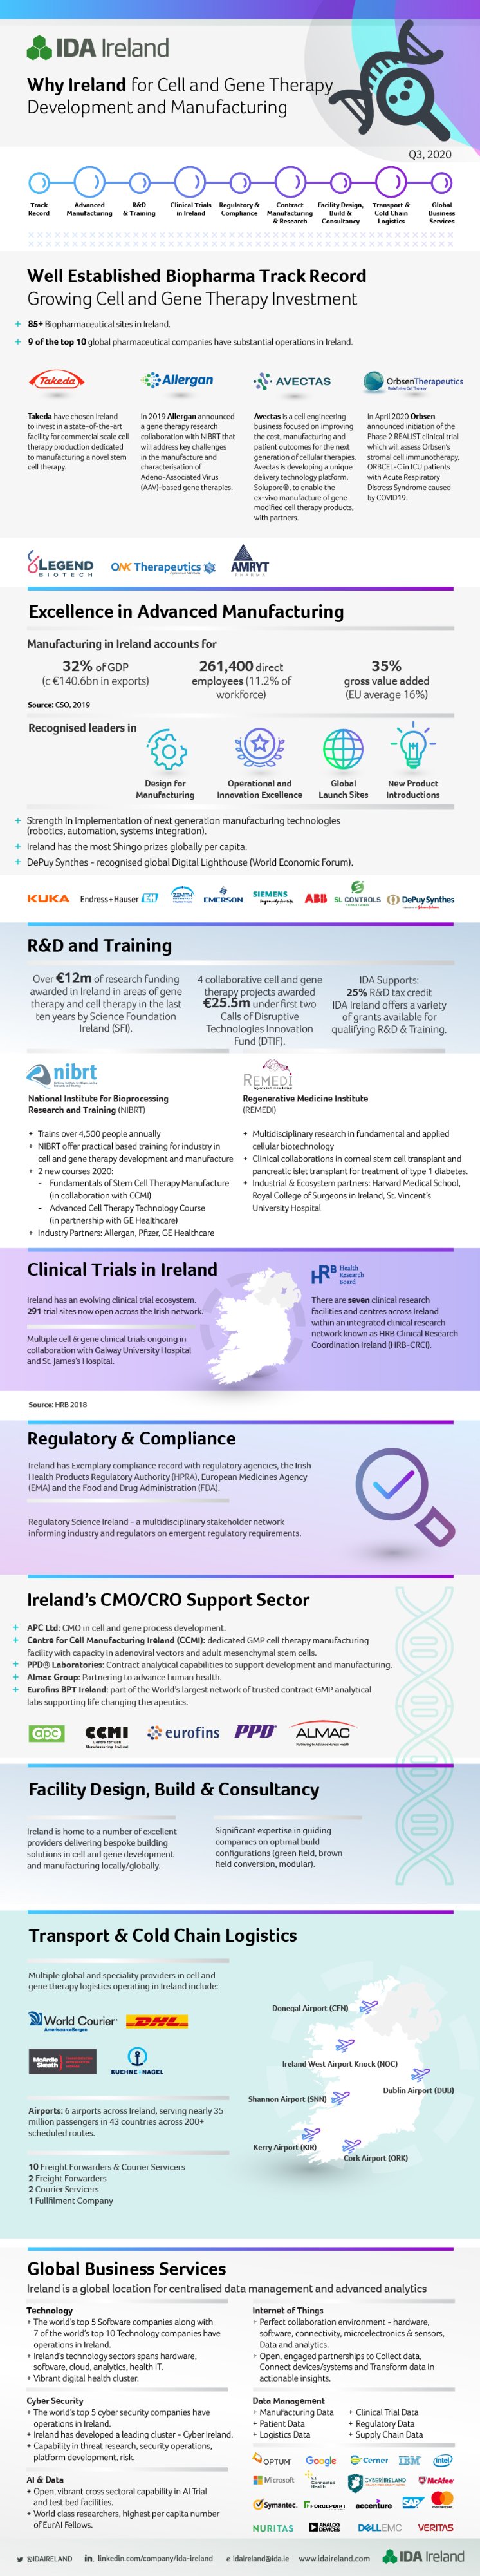 Why Ireland for Cell and Gene Therapy Development and Manufacturing